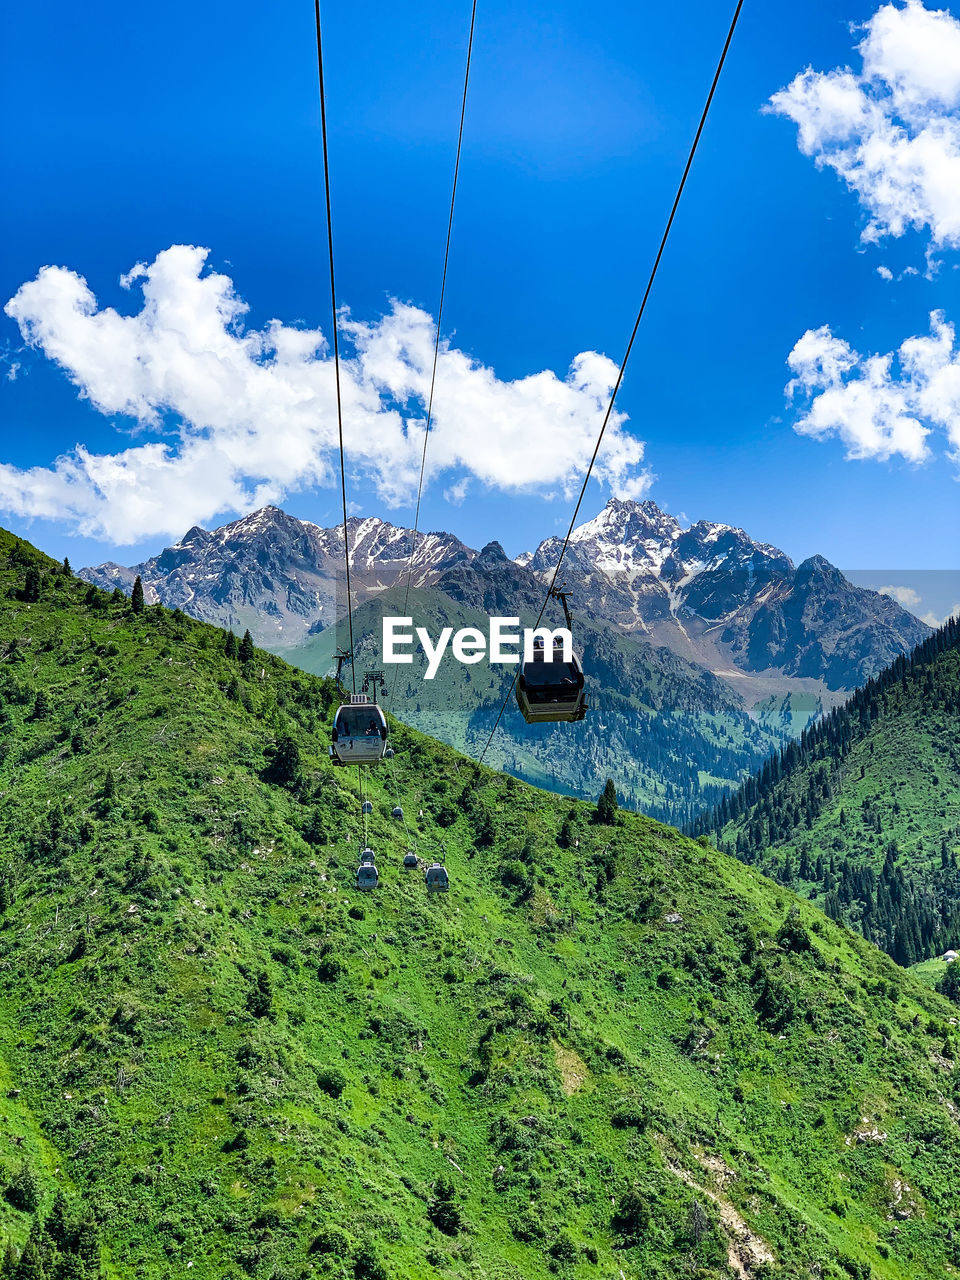 OVERHEAD CABLE CARS OVER MOUNTAINS